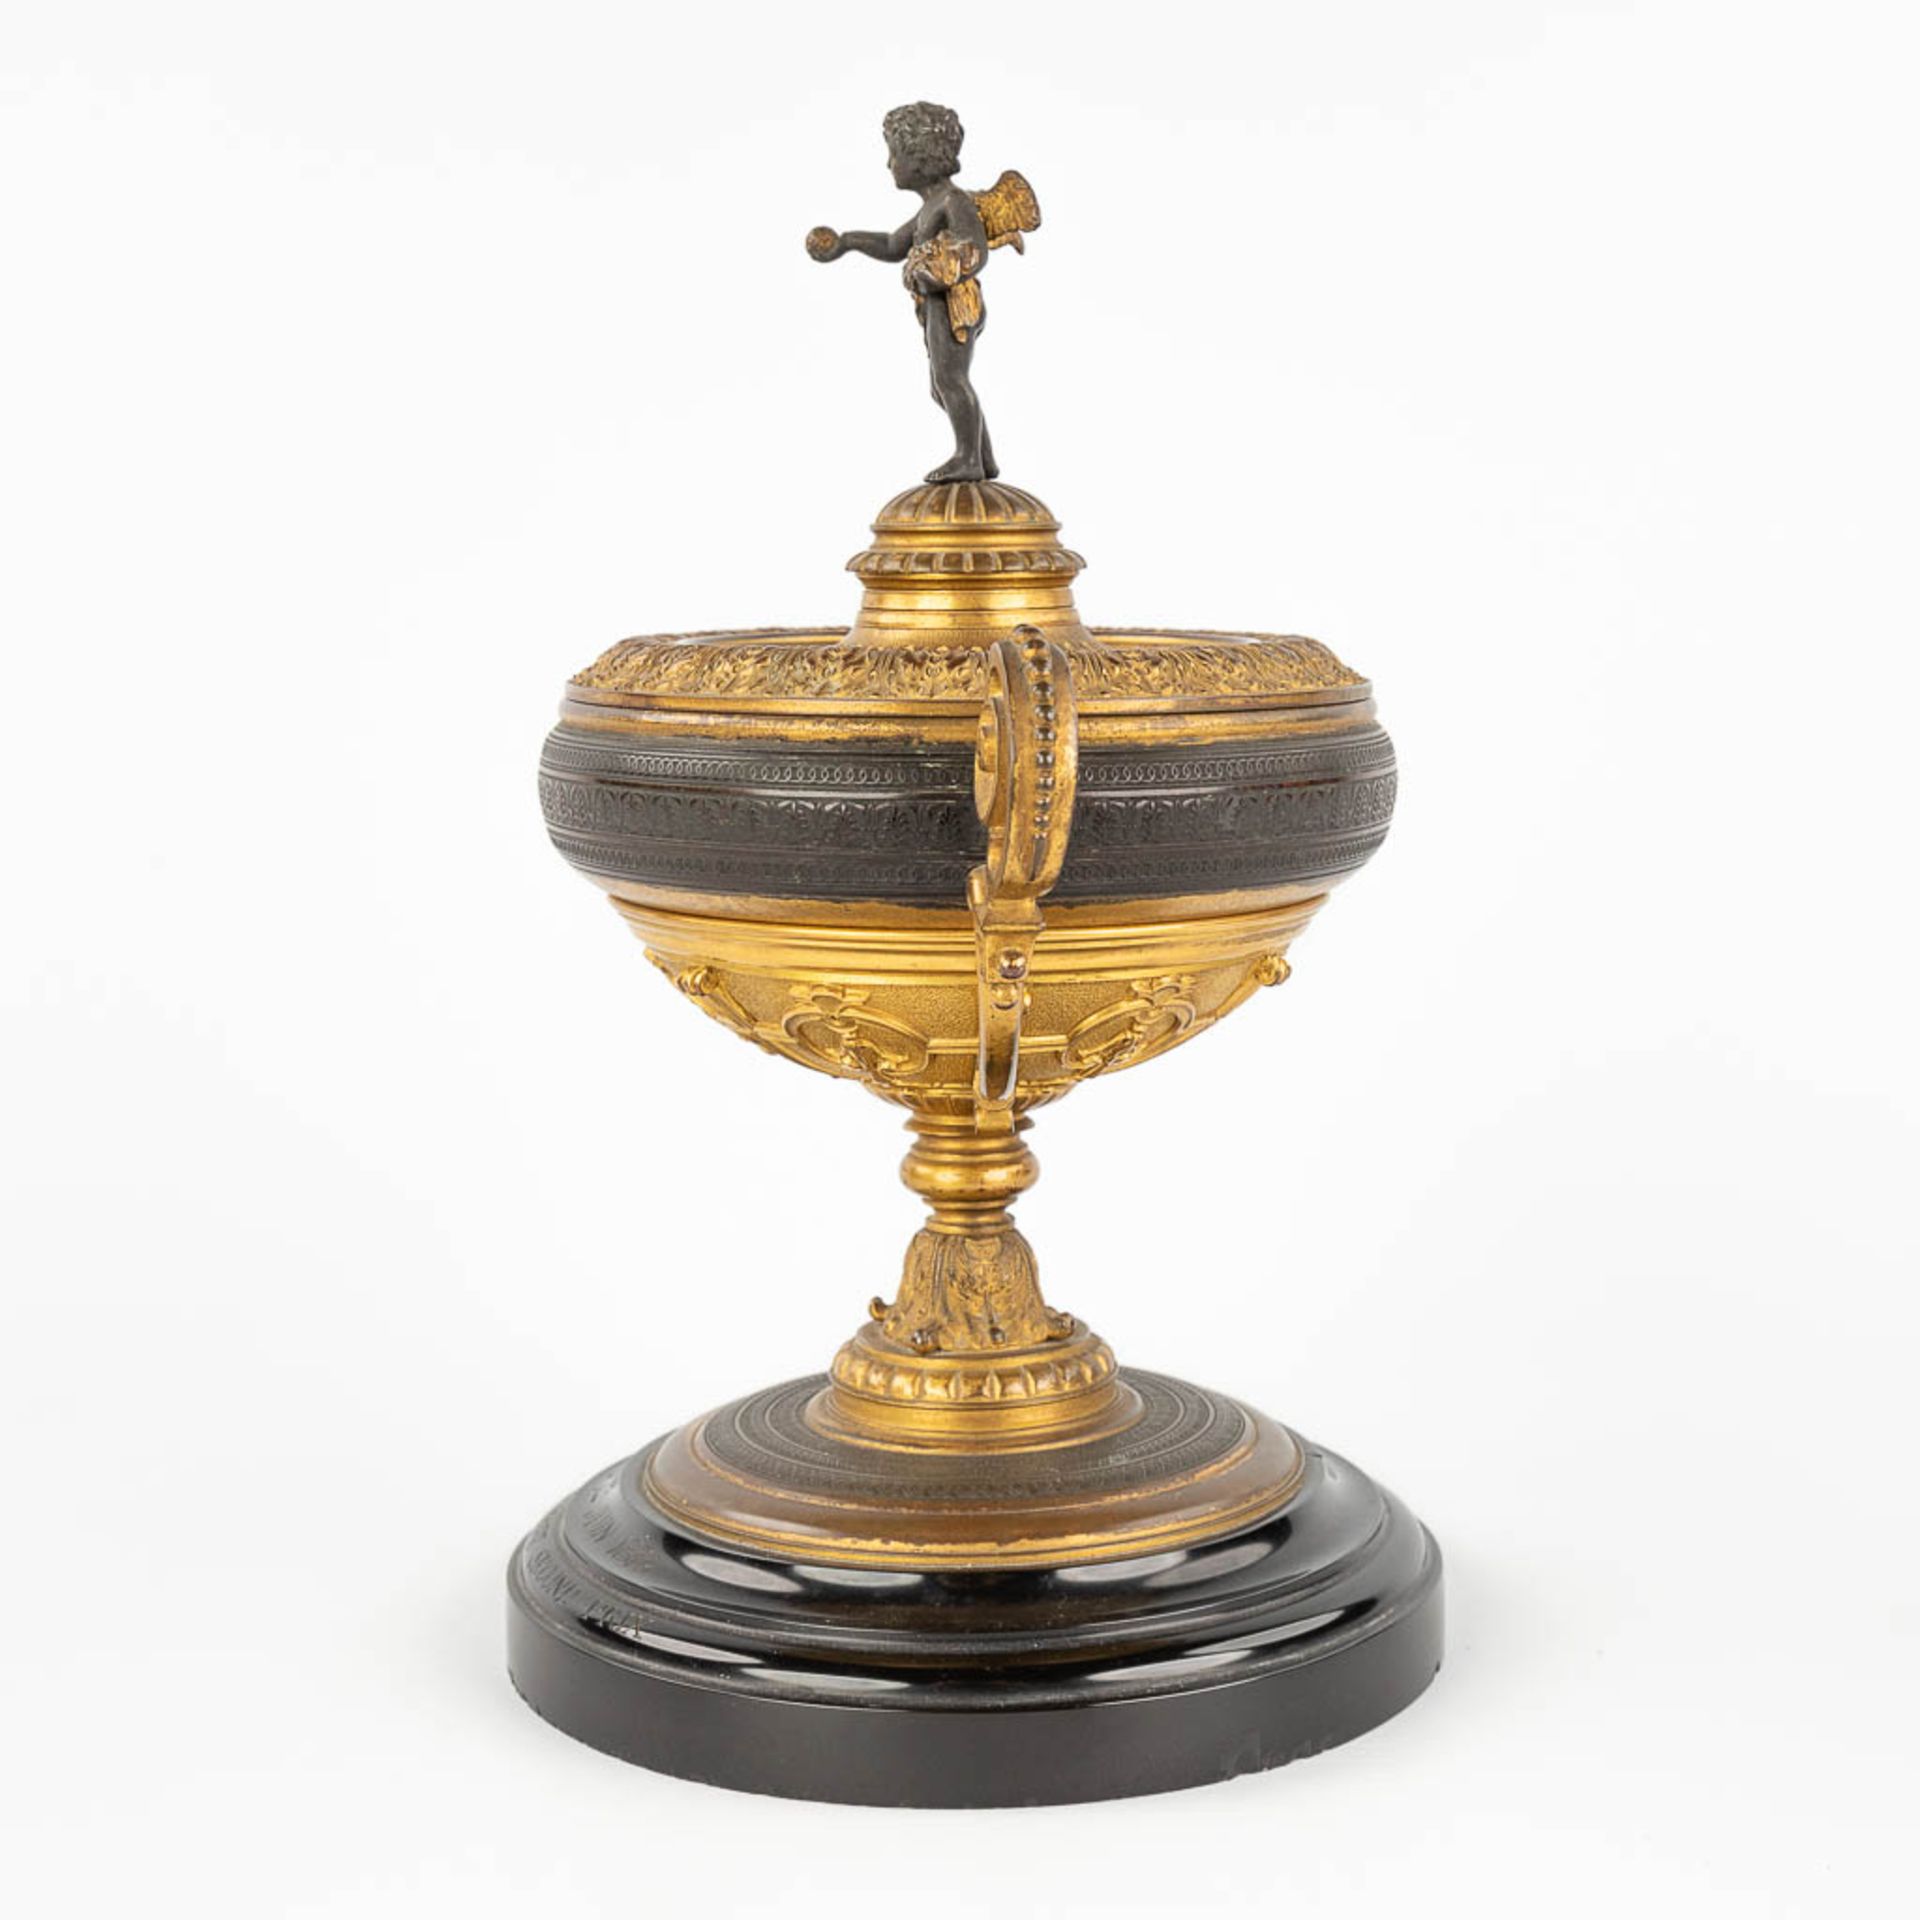 An antique trophy, made of gilt and patinated bronze. 19th C. (L: 16 x W: 22 x H: 27 cm) - Image 6 of 14